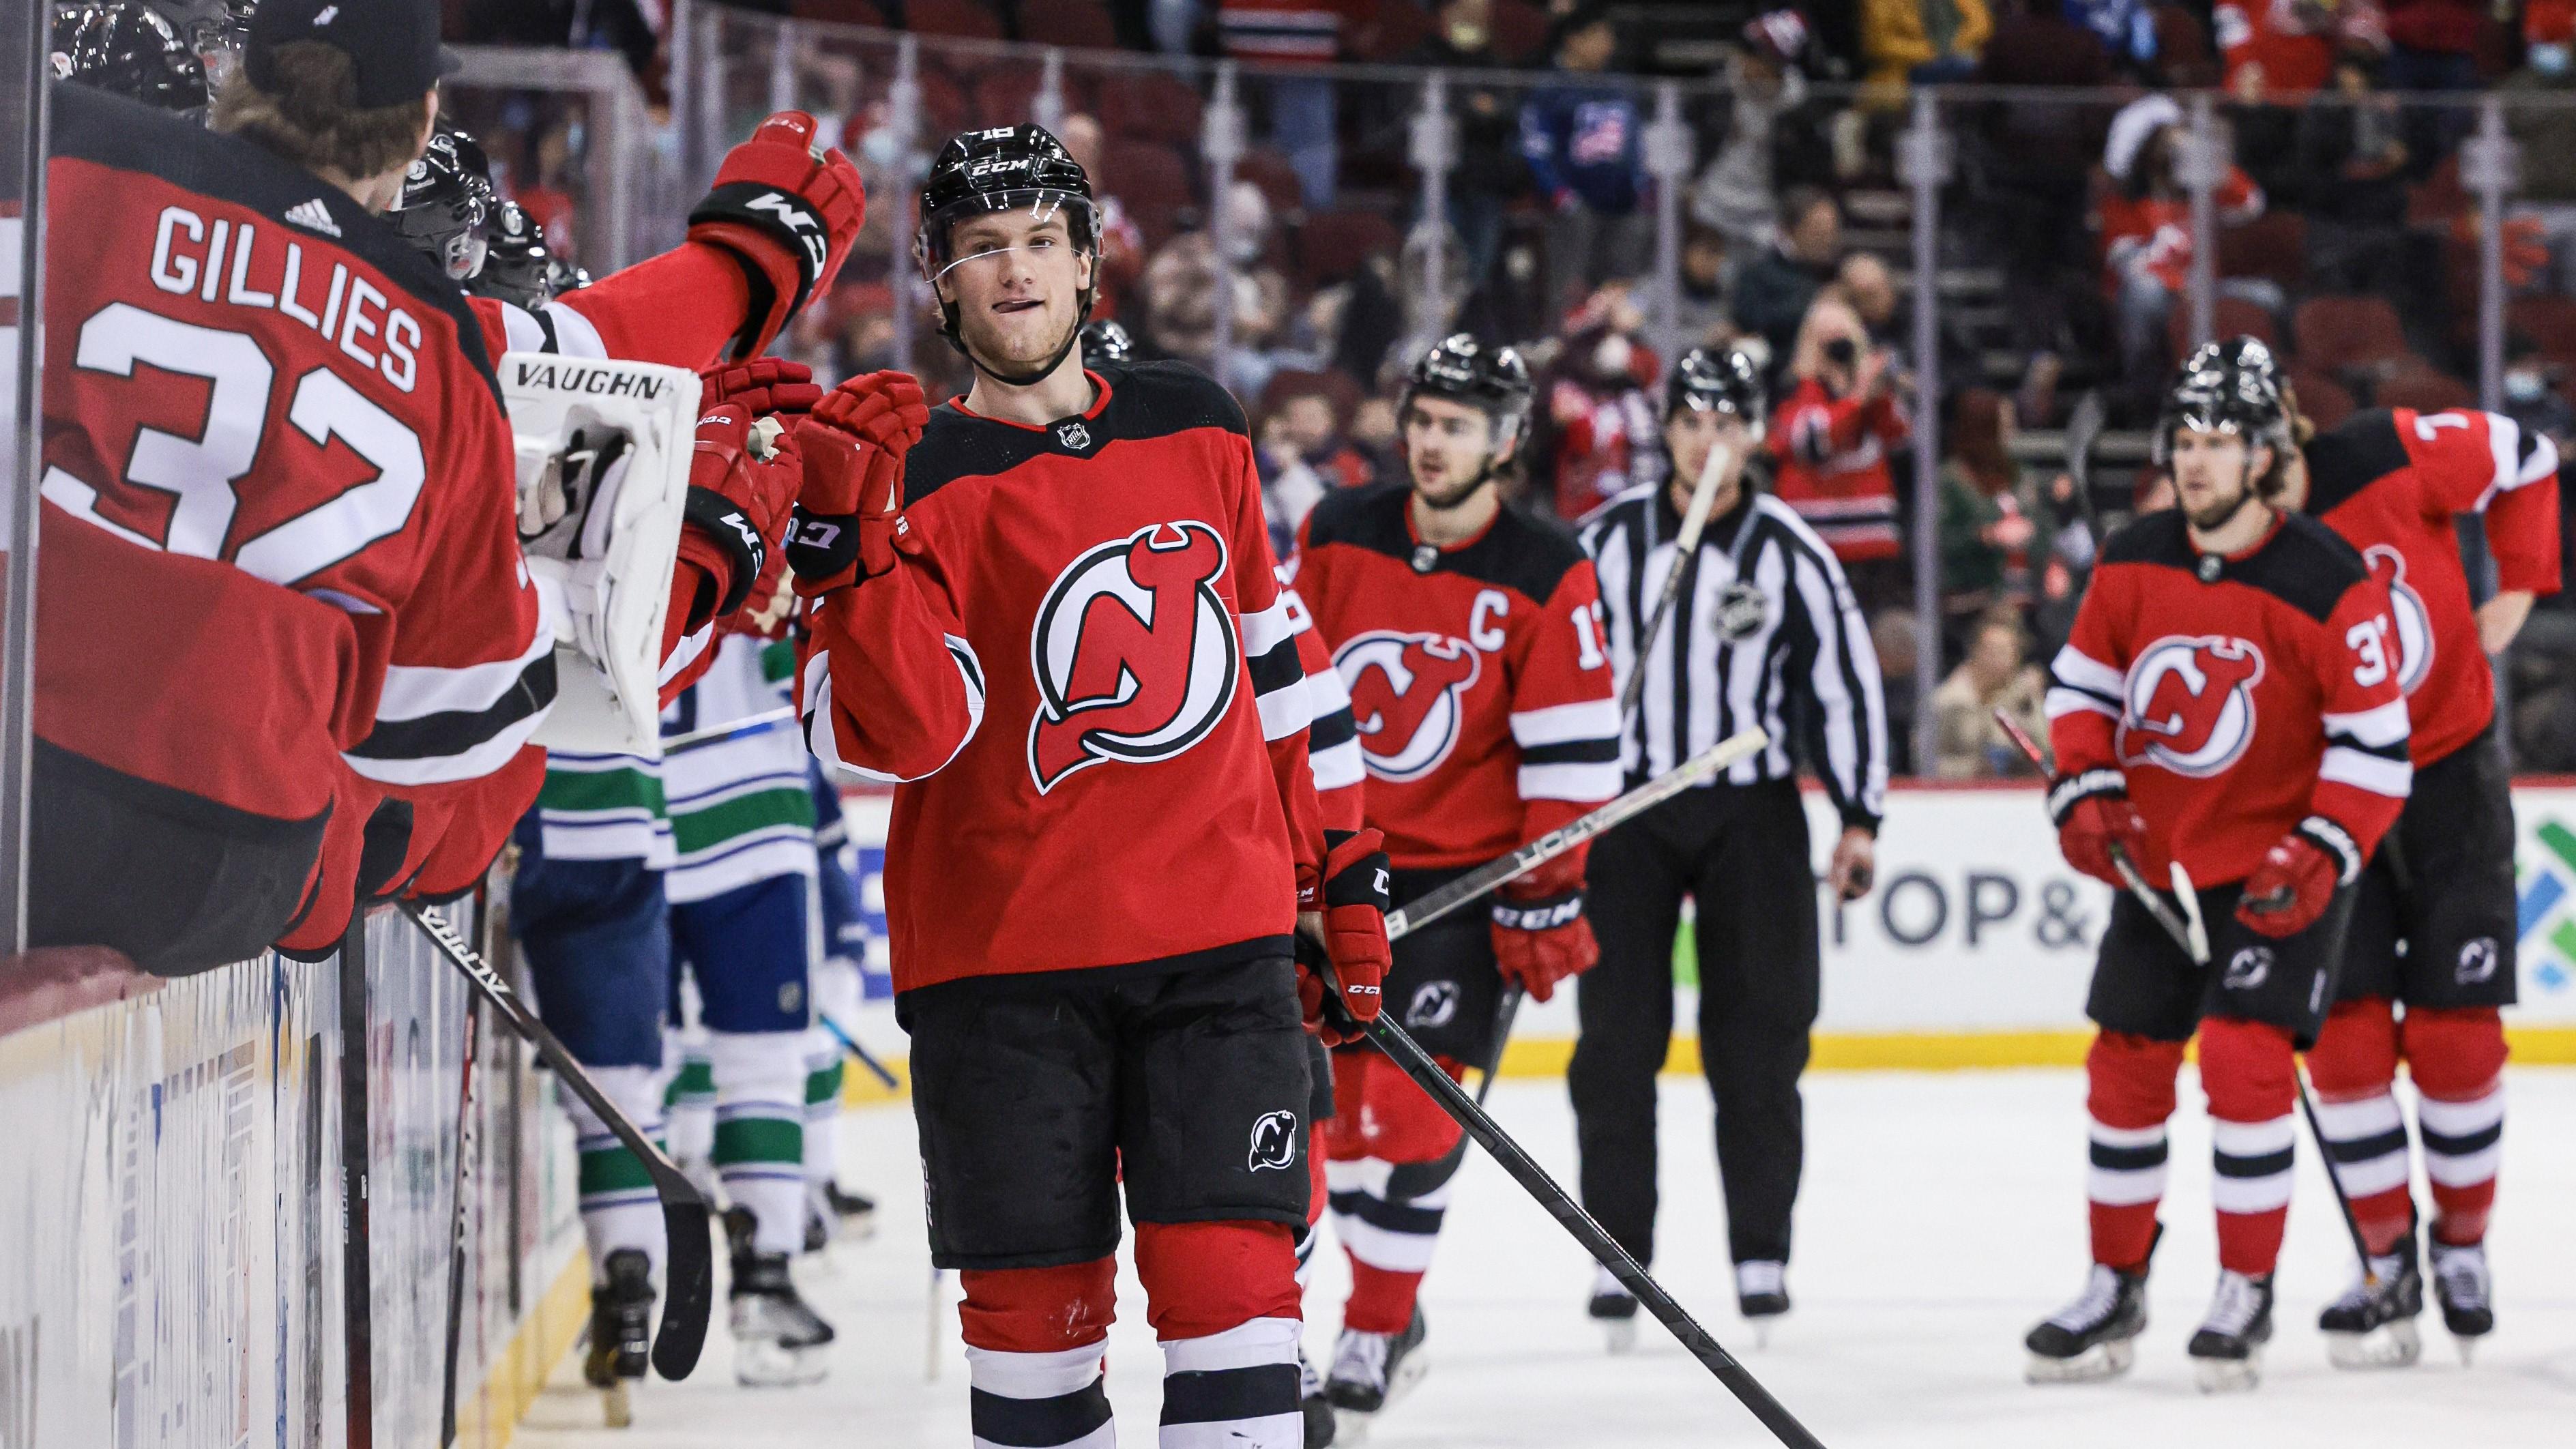 Feb 28, 2022; Newark, New Jersey, USA; New Jersey Devils center Dawson Mercer (18) celebrates his goal with teammates during the first period against the Vancouver Canucks at Prudential Center. / Vincent Carchietta-USA TODAY Sports